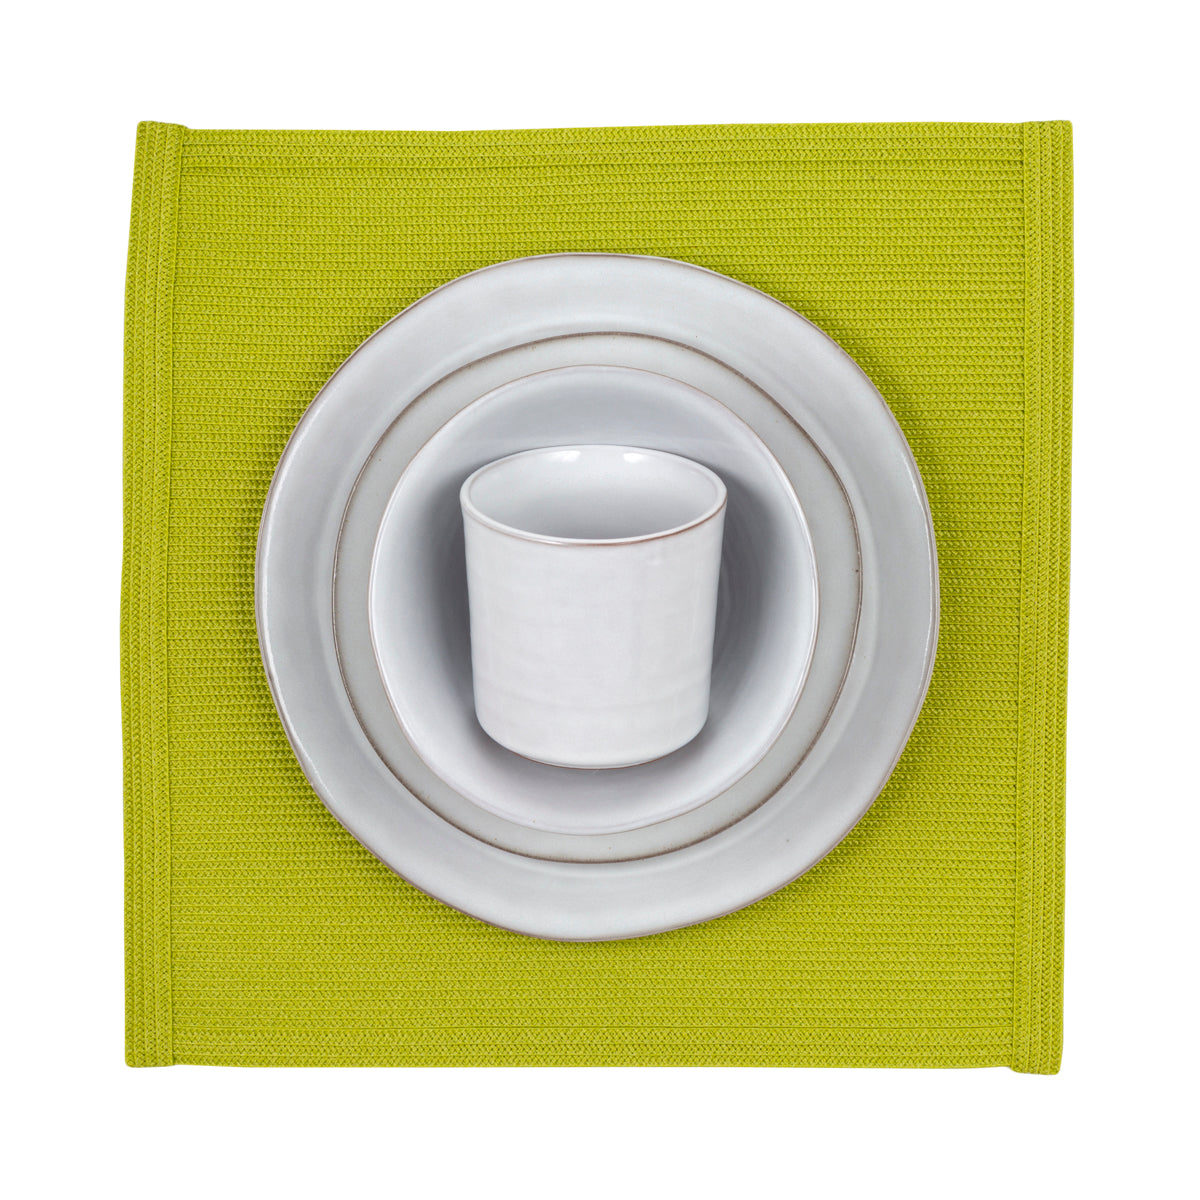 stone dinnerware collection with green placemat